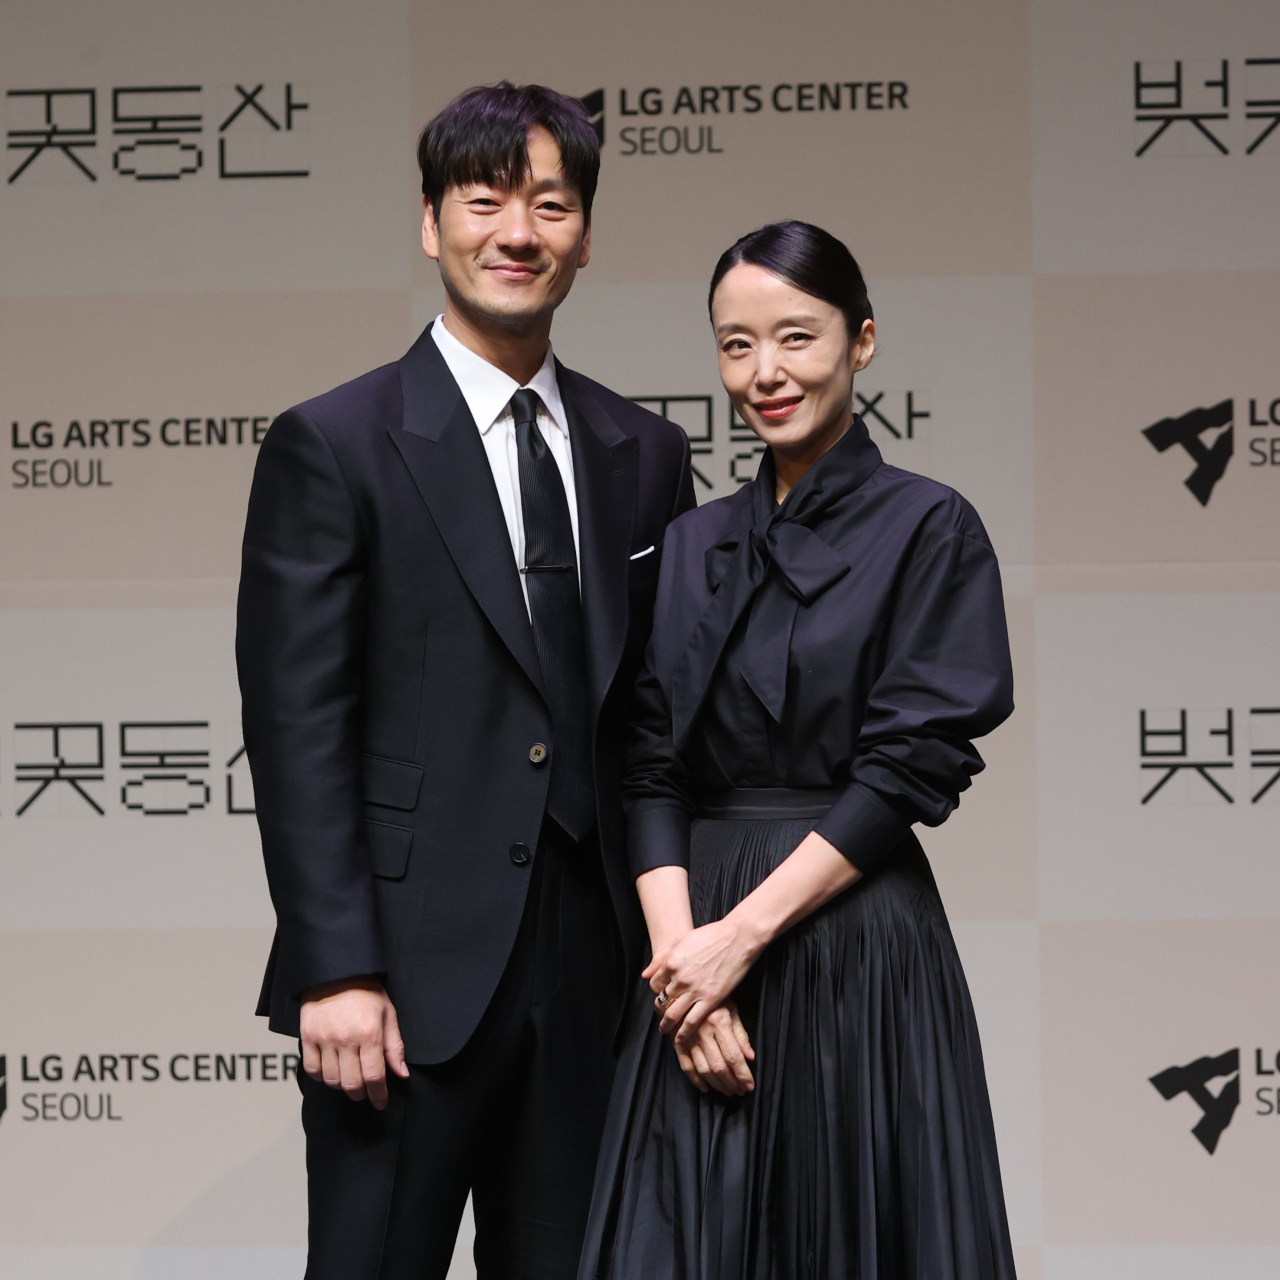 Jeon Do-yeon (right) and Park Hae-soo pose for photos during a press conference at the LG Arts Center in Seoul, April 23. (Yonhap)